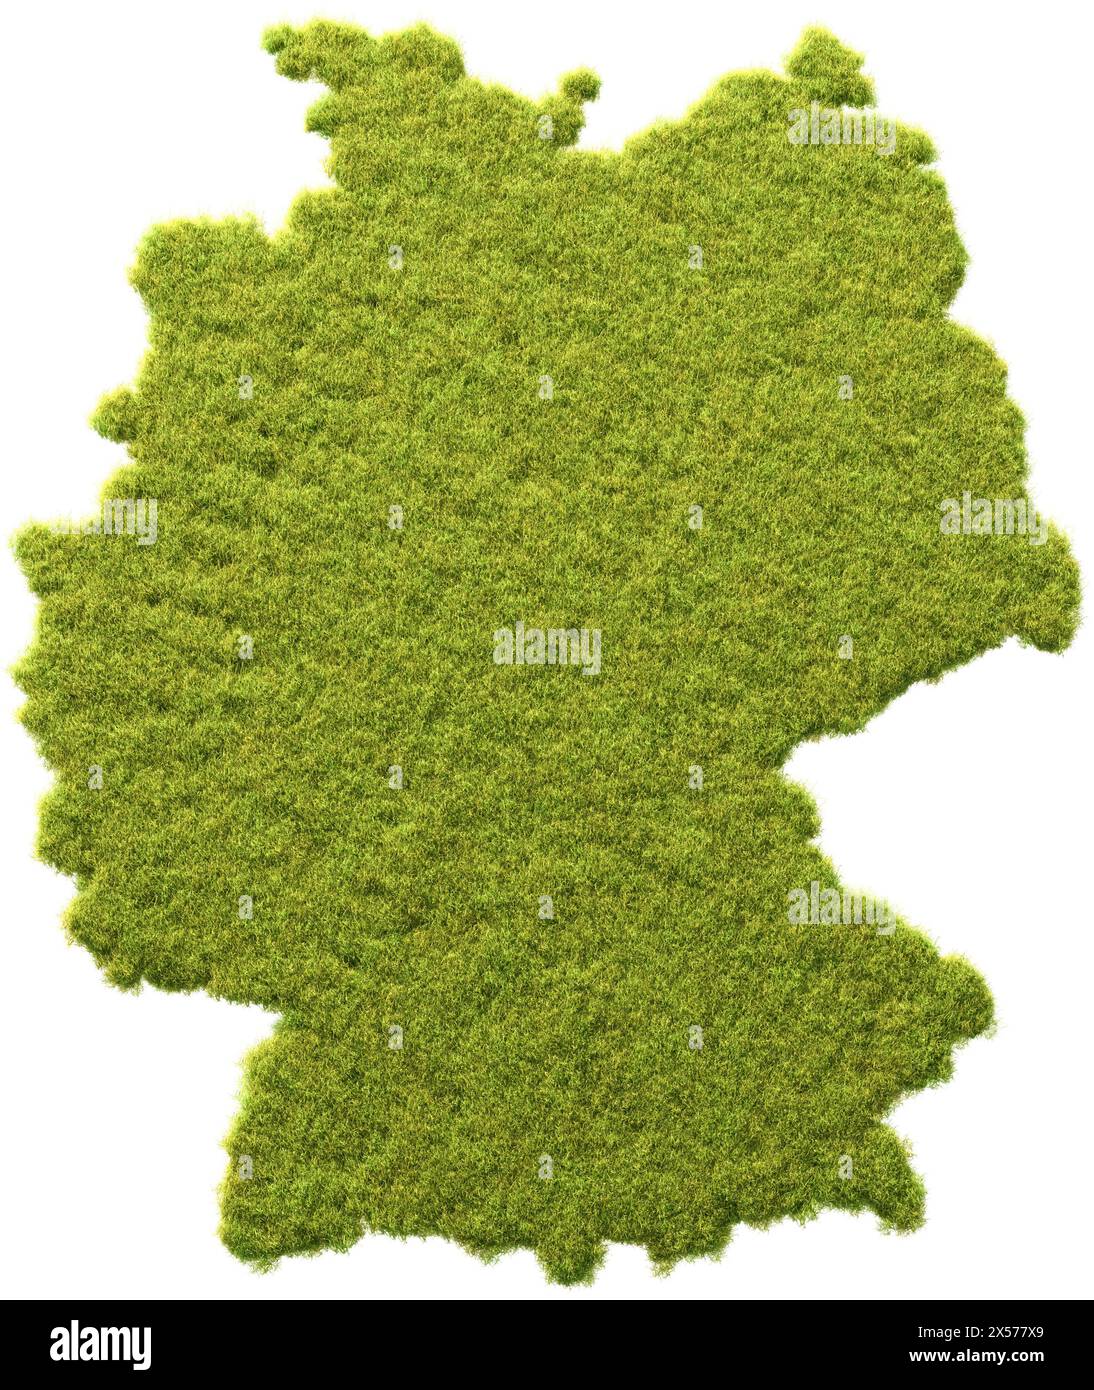 Ecology in Germany concept. Lawn in the form of Germany. Transparent background. Stock Photo